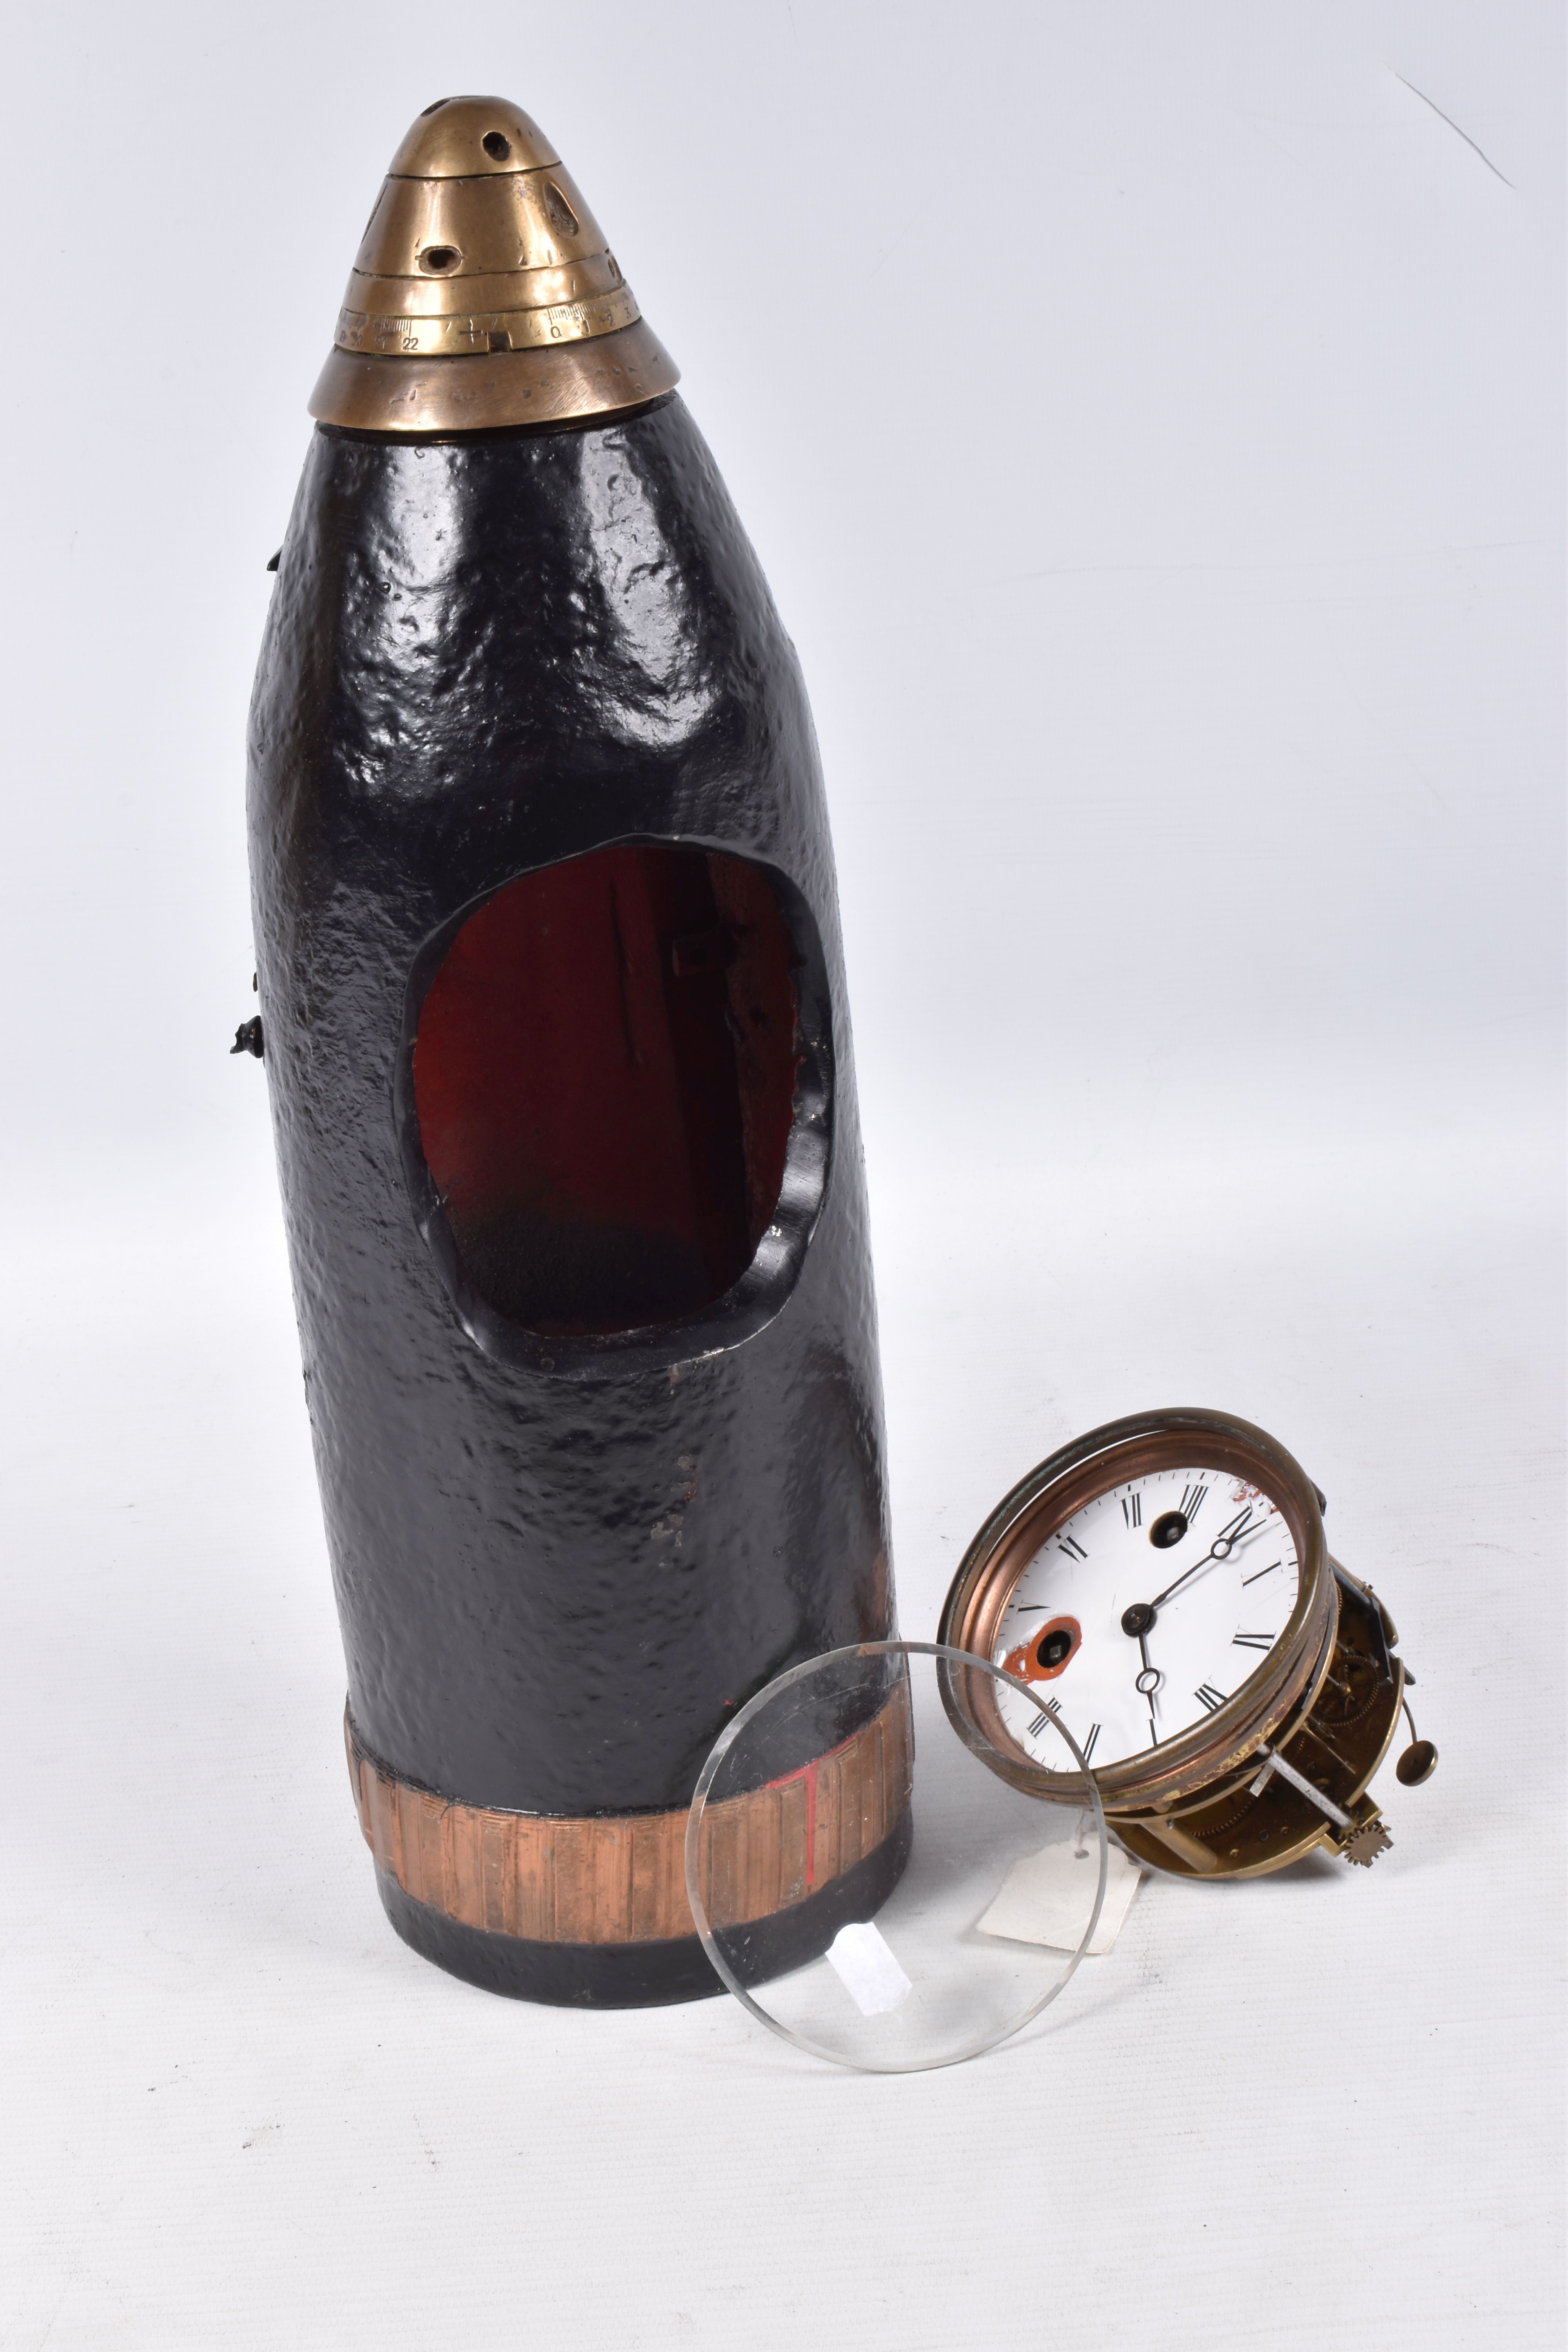 A TRENCH ART MANTLE CLOCK FORMED FROM A BOMB CASING, 19th century movement free from the case,